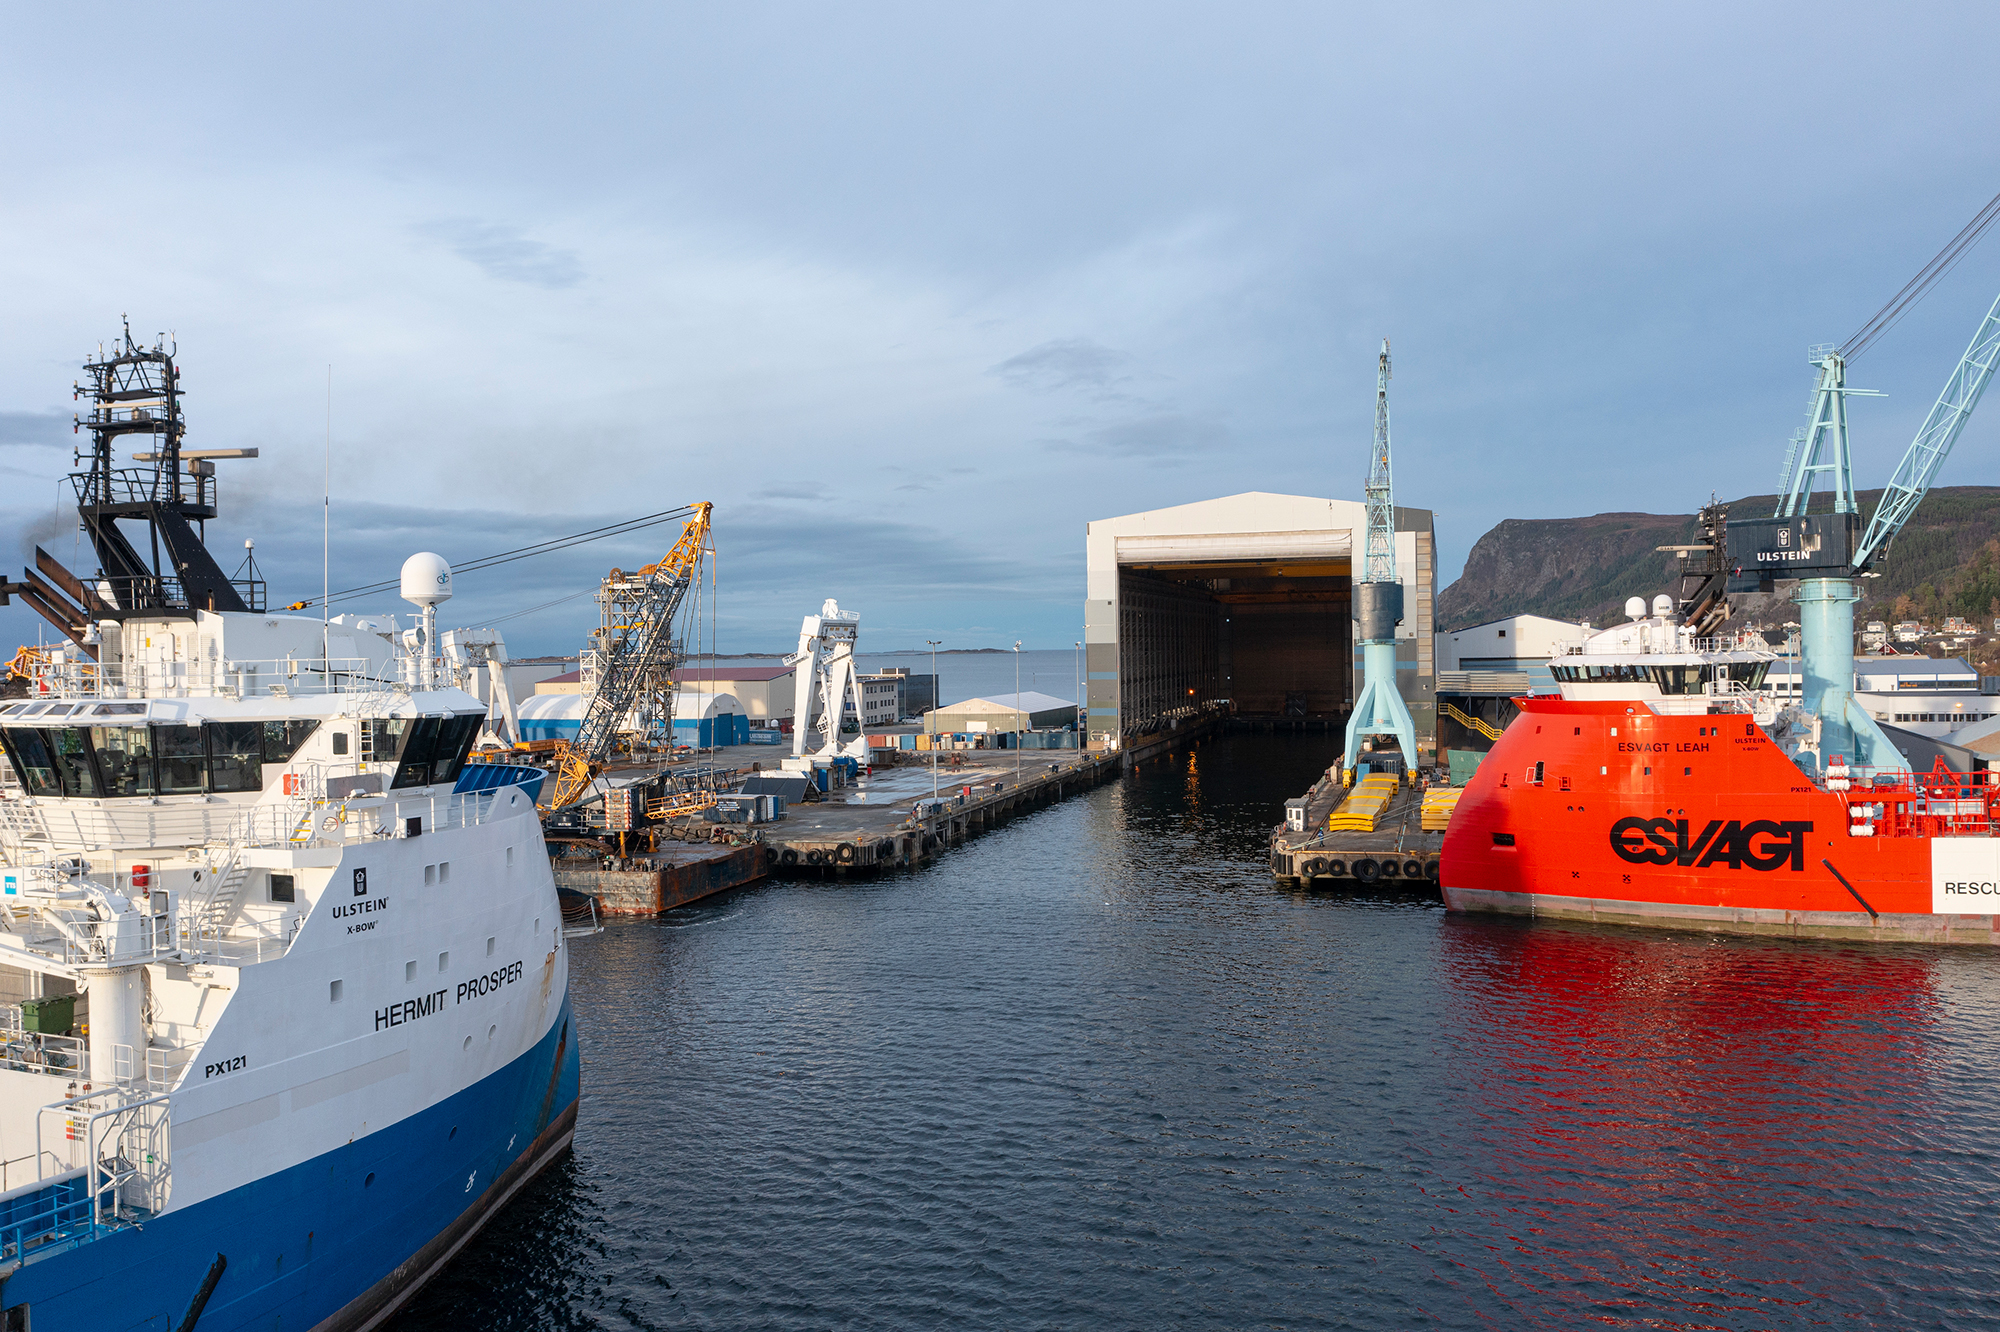 Launch and dock of the two Esvagt vessels, photo taken in November 2021. (Photo: Uavpic.com)